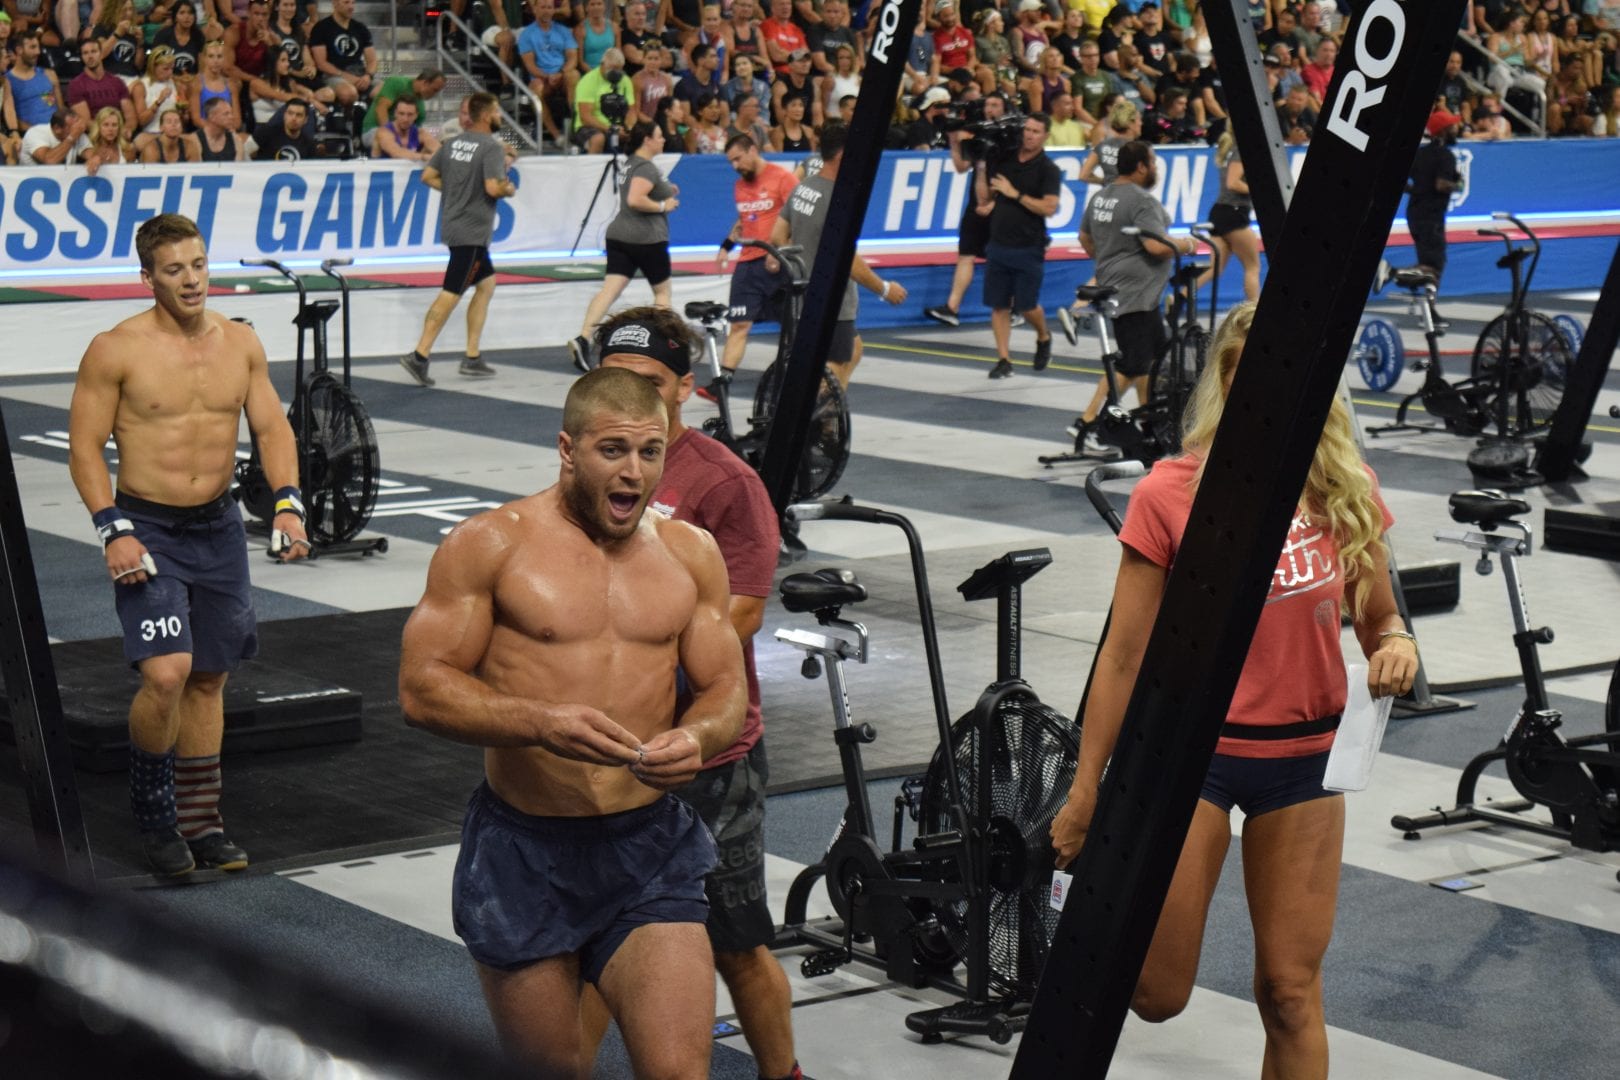 Jacob Heppner leaves the floor of the coliseum after completing an event at the 2019 CrossFit Games.